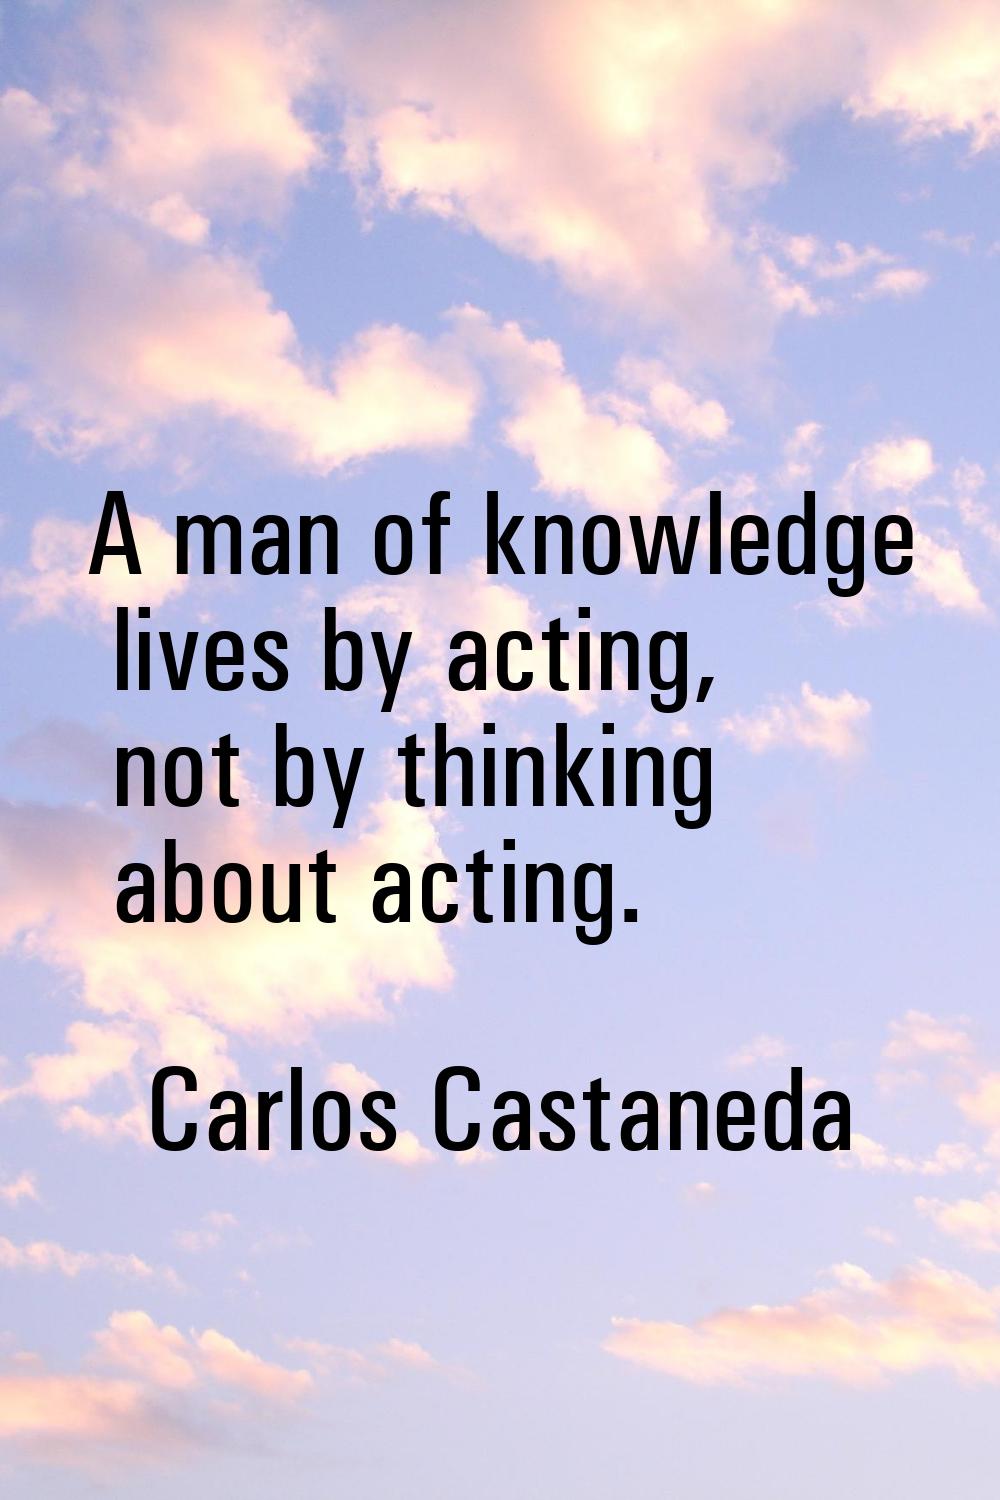 A man of knowledge lives by acting, not by thinking about acting.